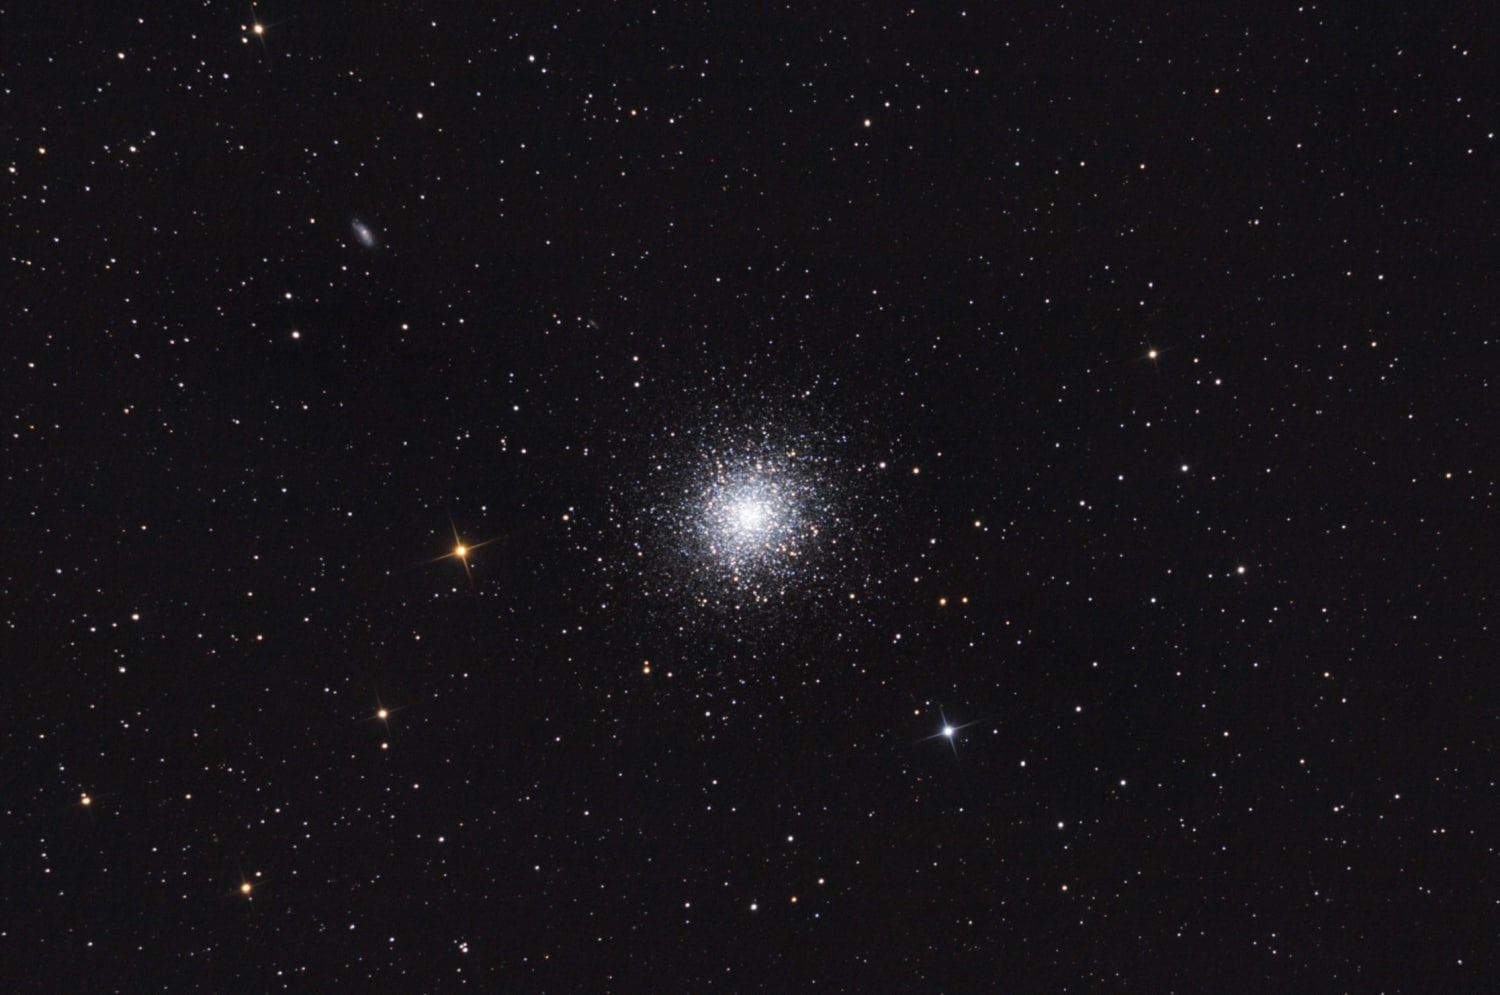 The Great Hercules star cluster